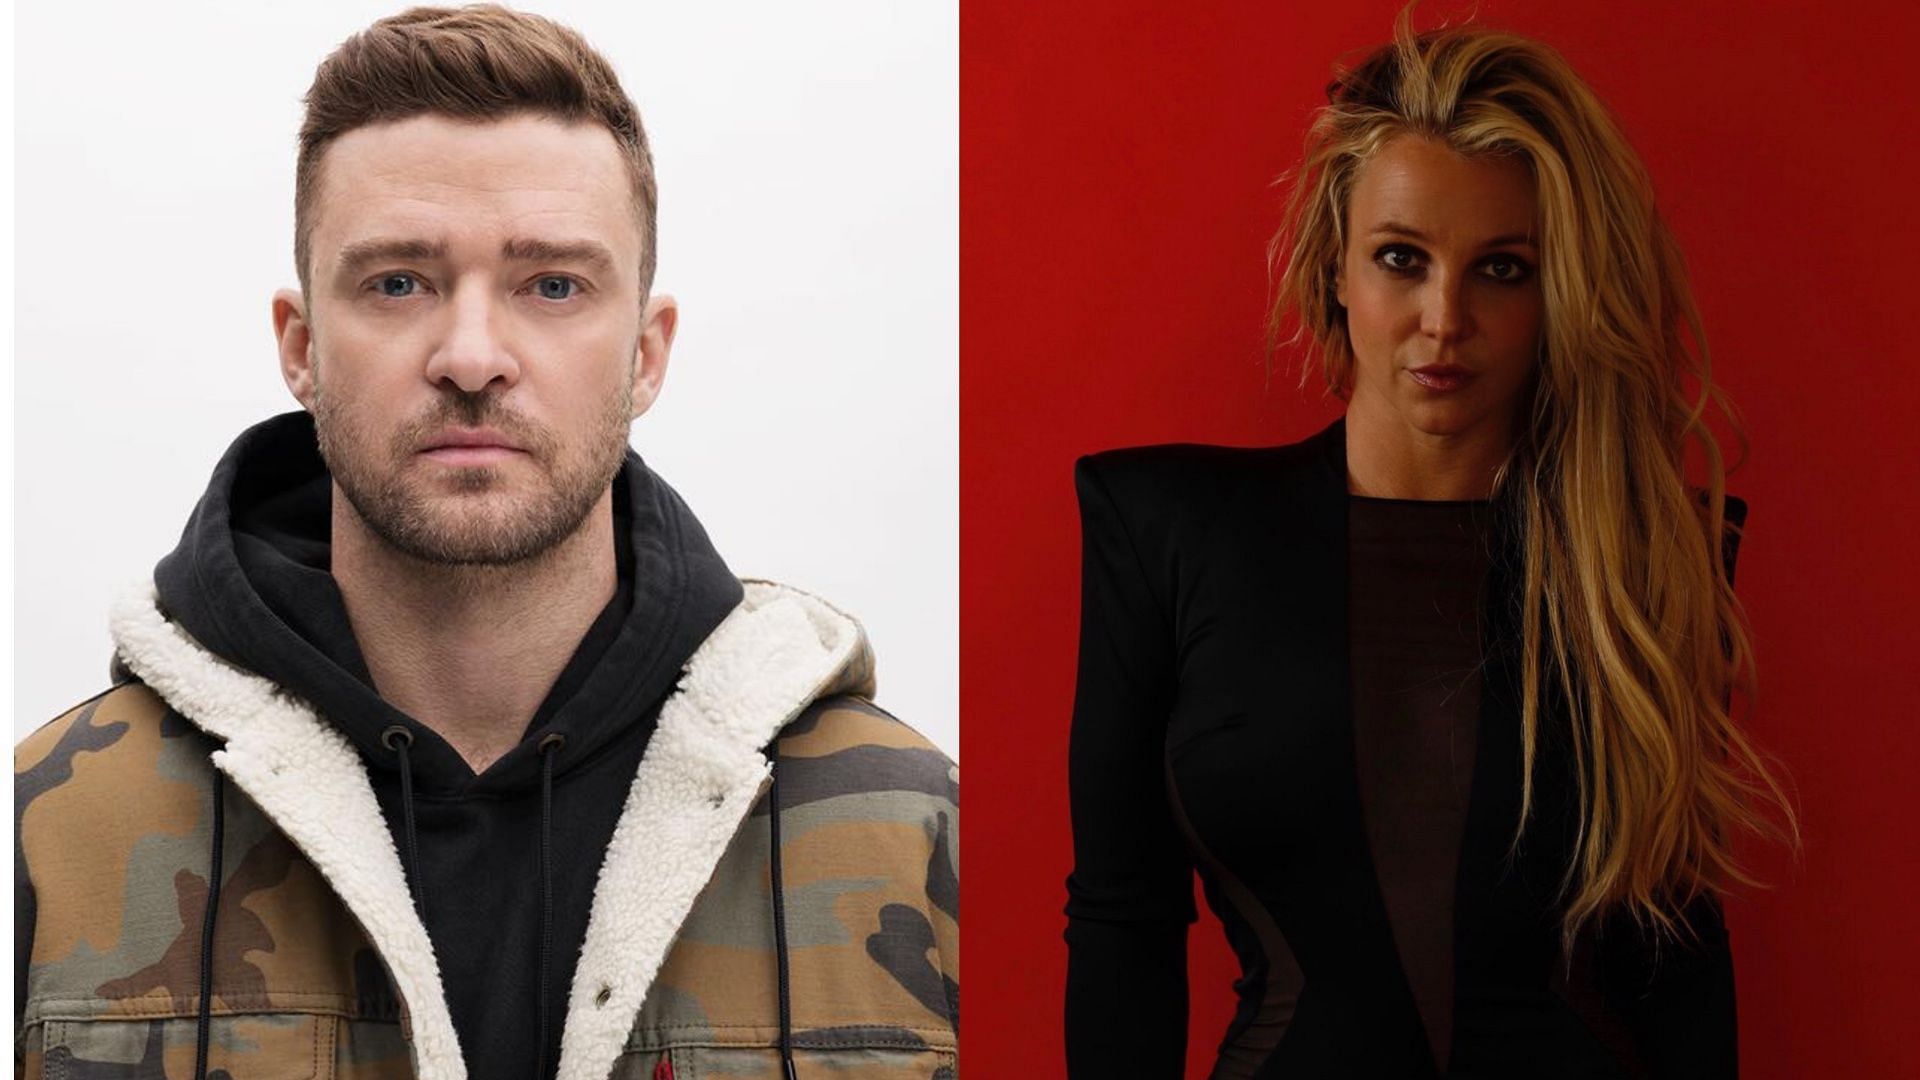 Justin Timberlake is apparently not happy with his ongoing drama with Britney Spears (Image via Facebook / Justin Timberlake / Britney Spears)